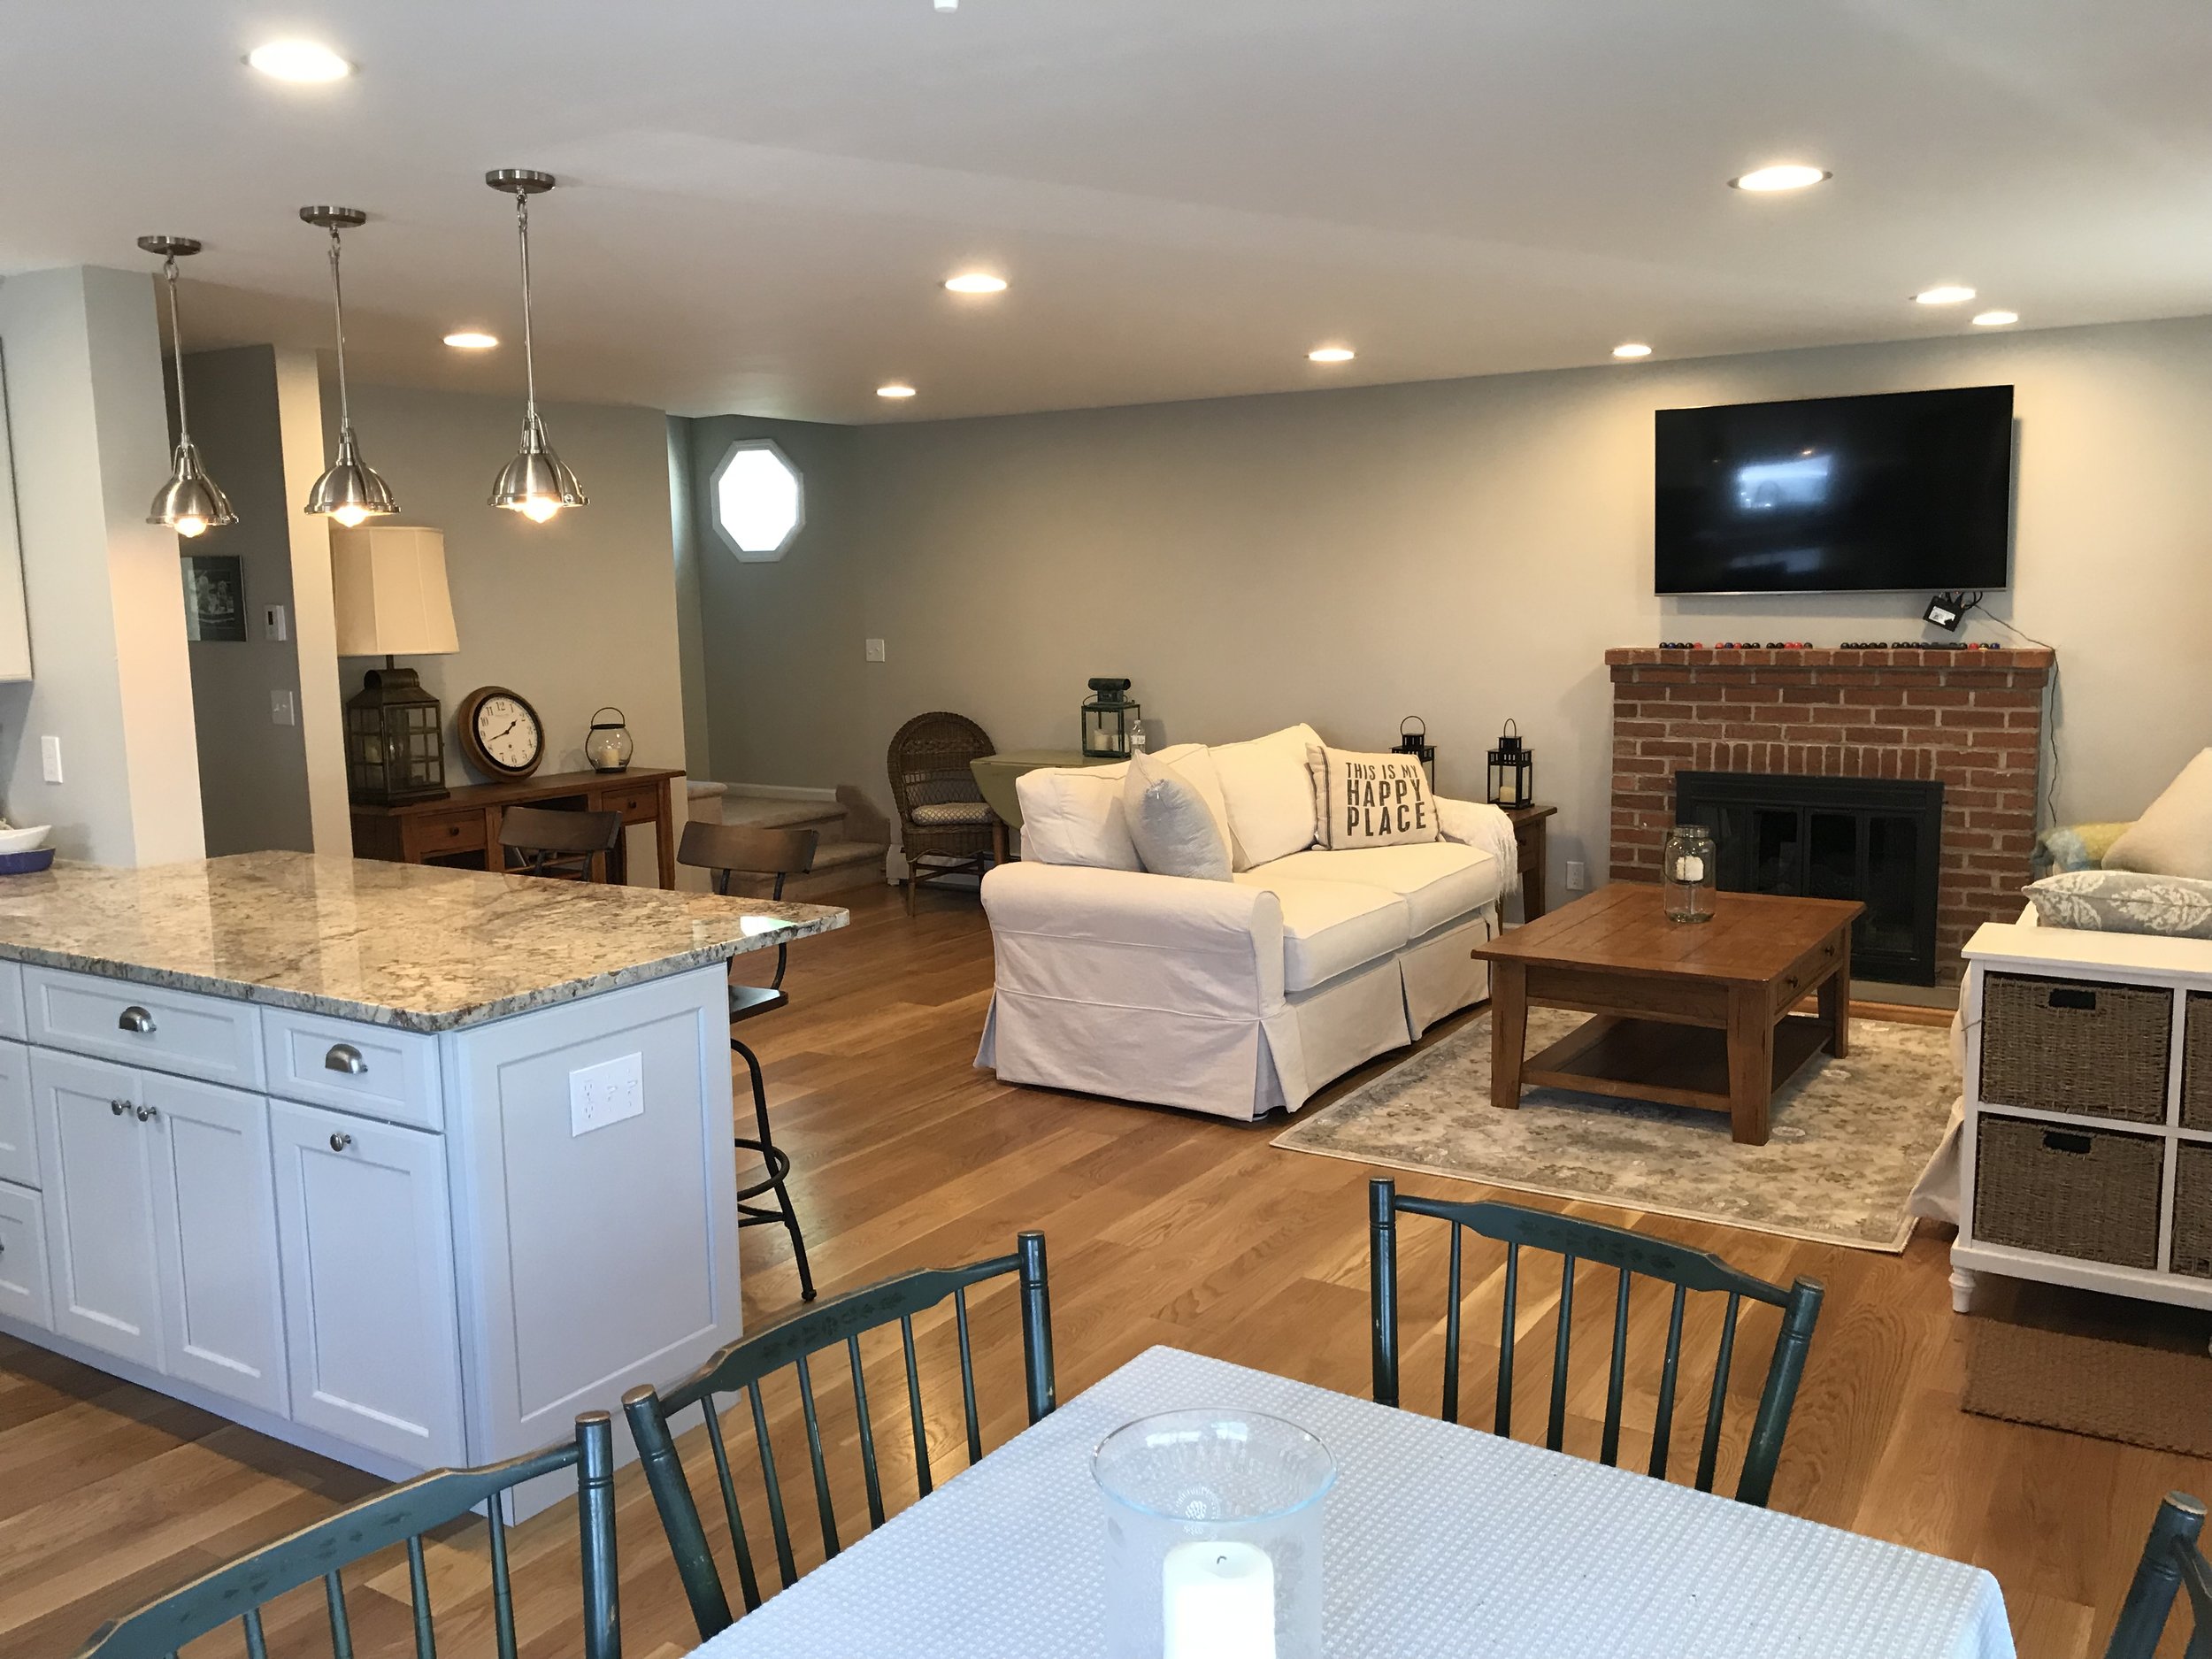 Kitchen, Bathroom, and Living Room Remodel in Niantic CT